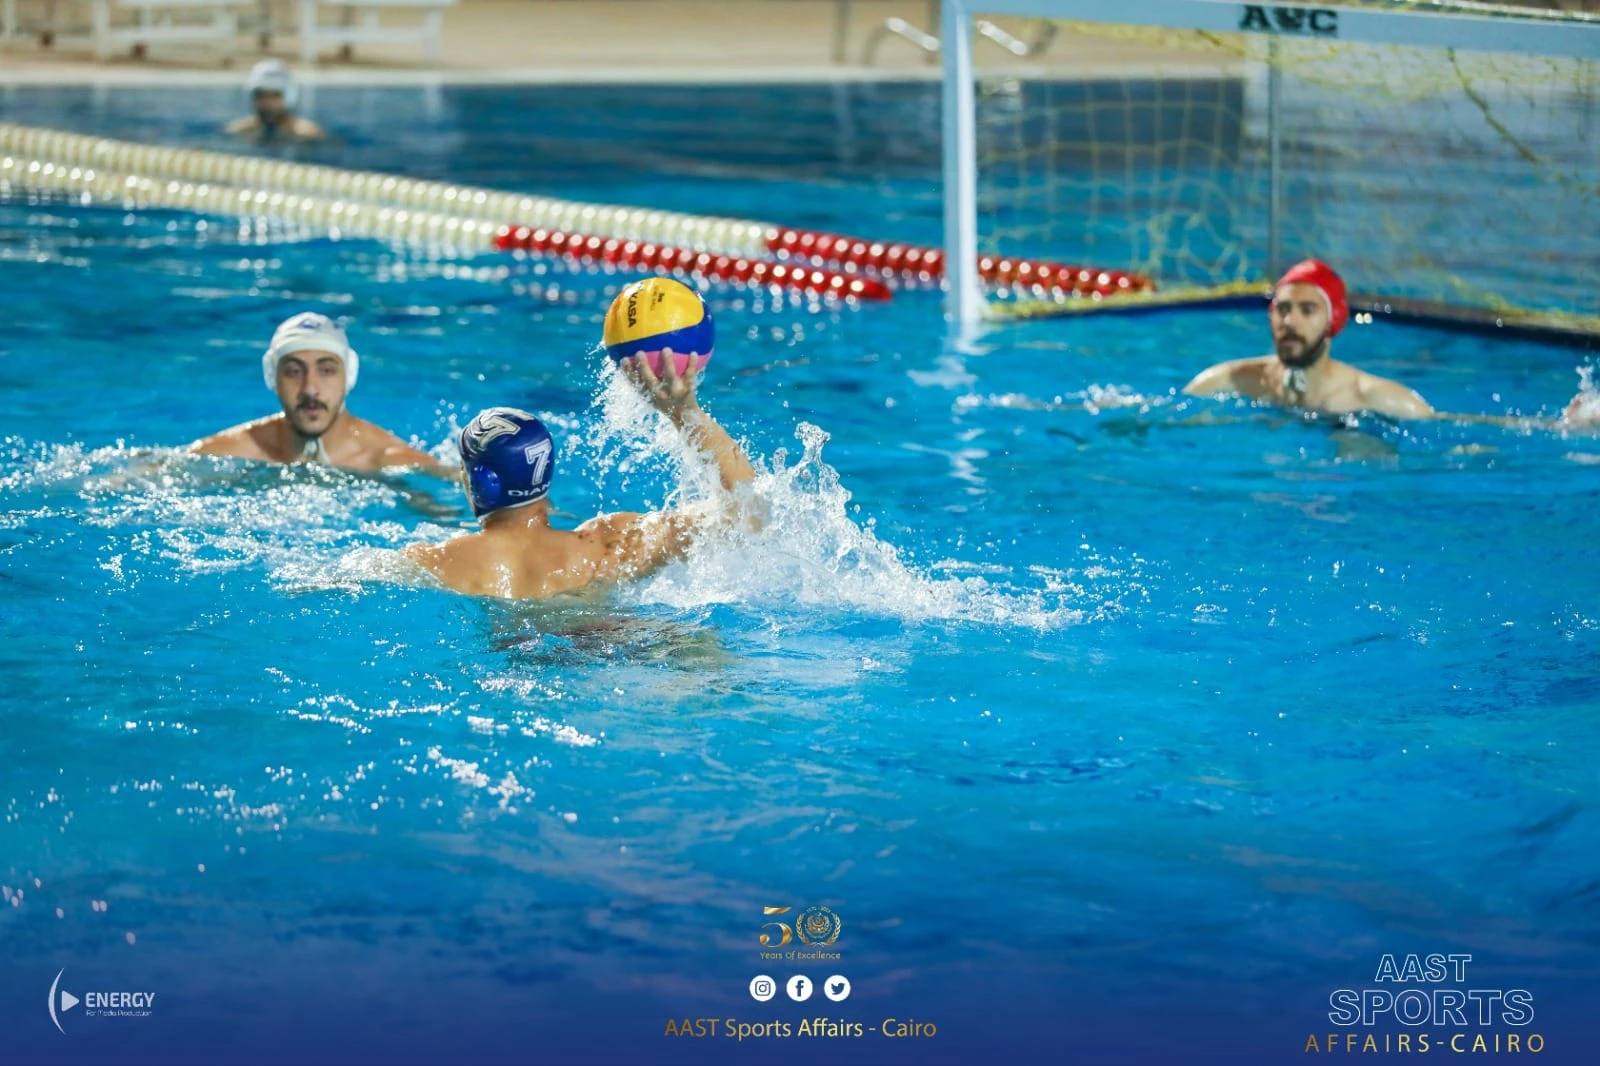 The Academy's water polo team in Cairo wins silver in the championship of private universities held at the American University in Cairo.